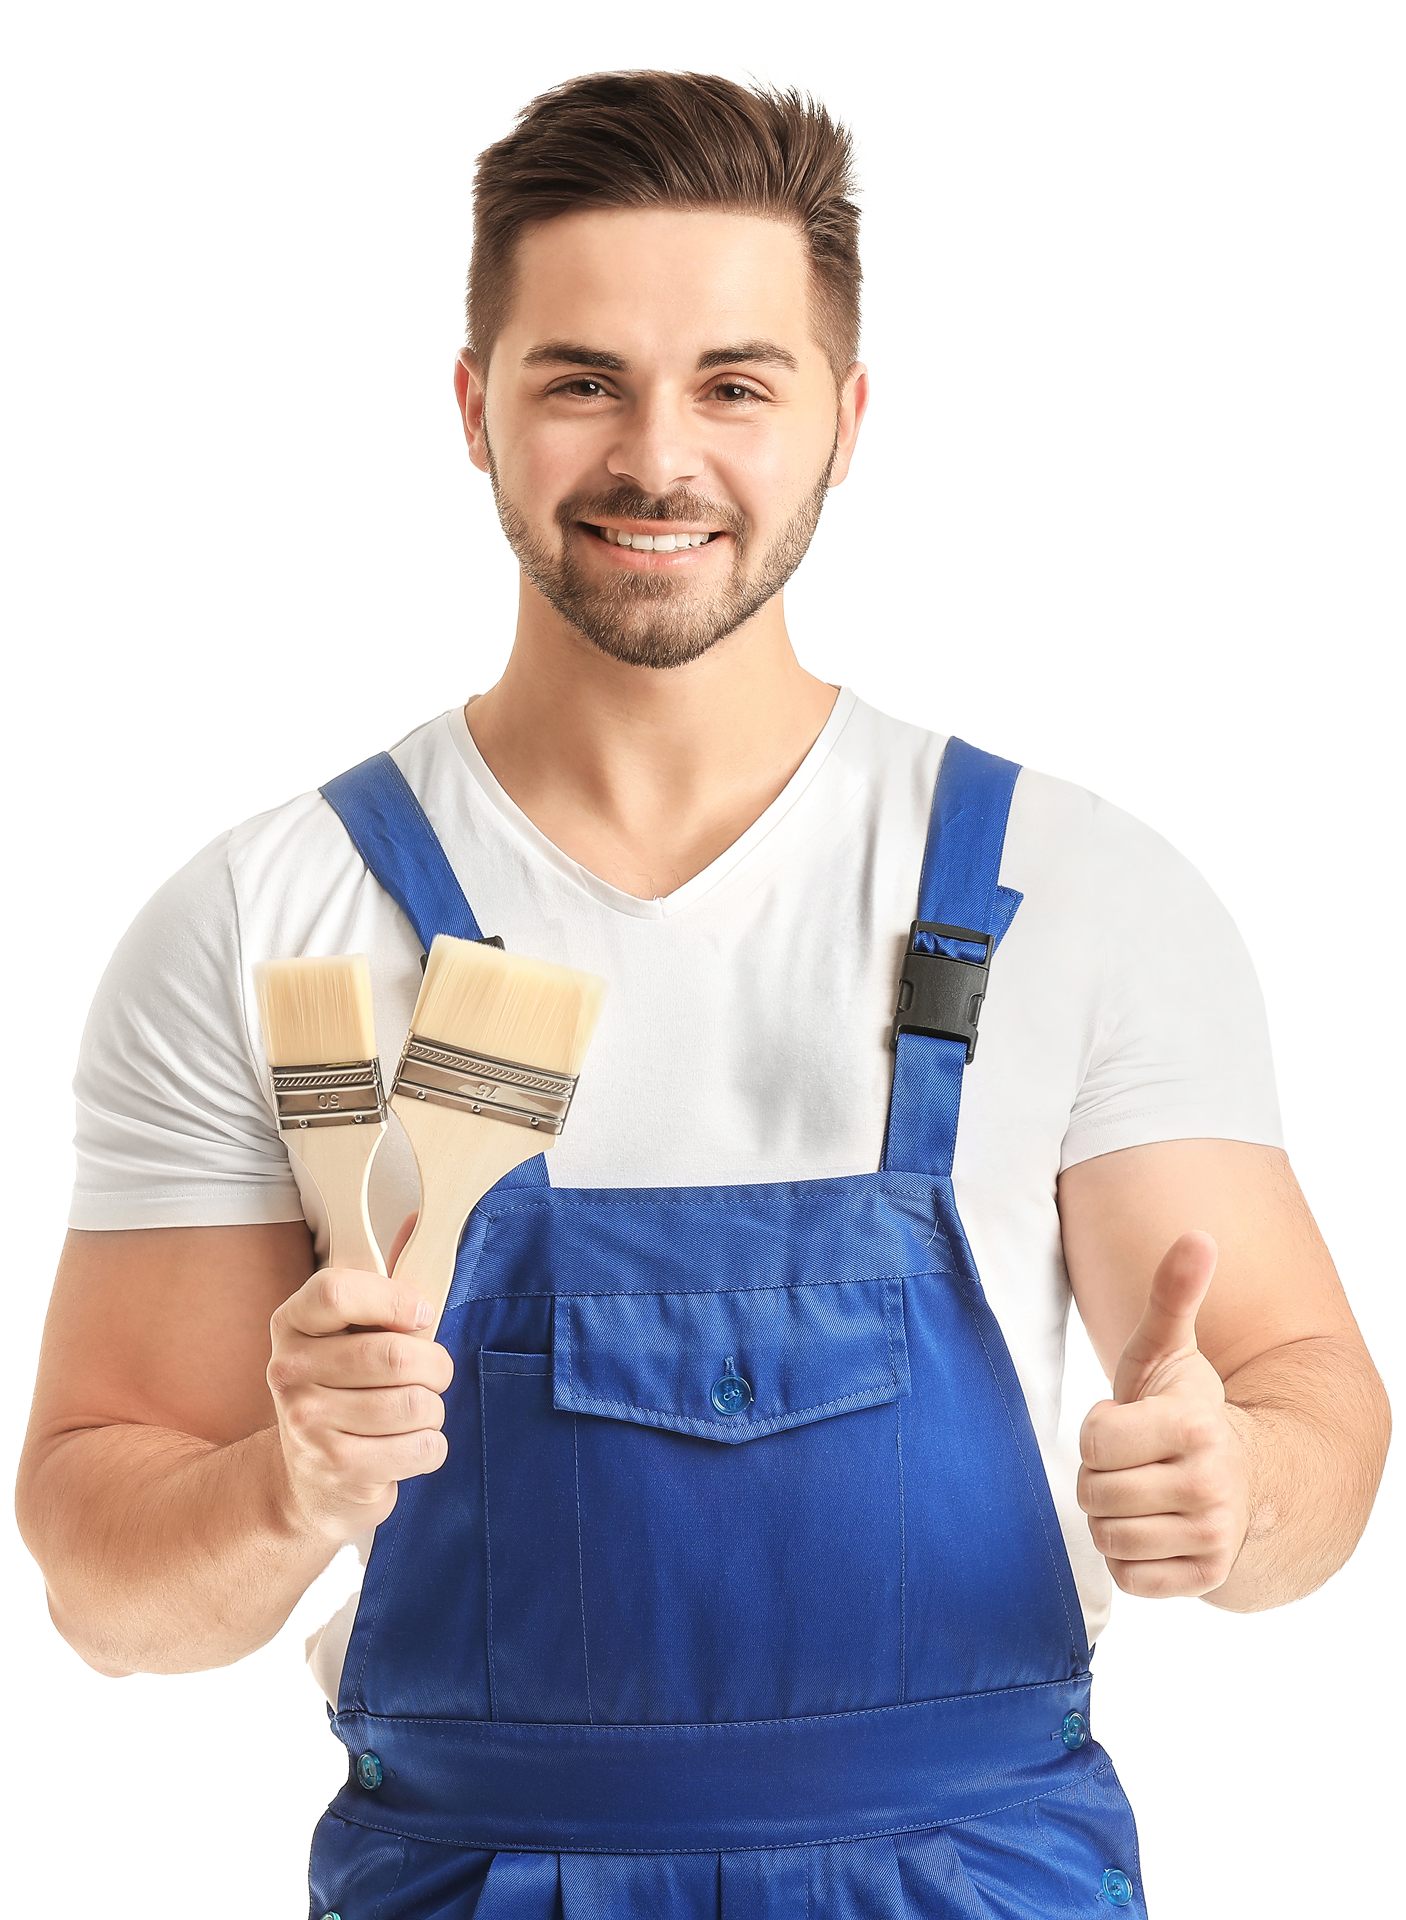 A man in blue overalls is holding two paint brushes and giving a thumbs up